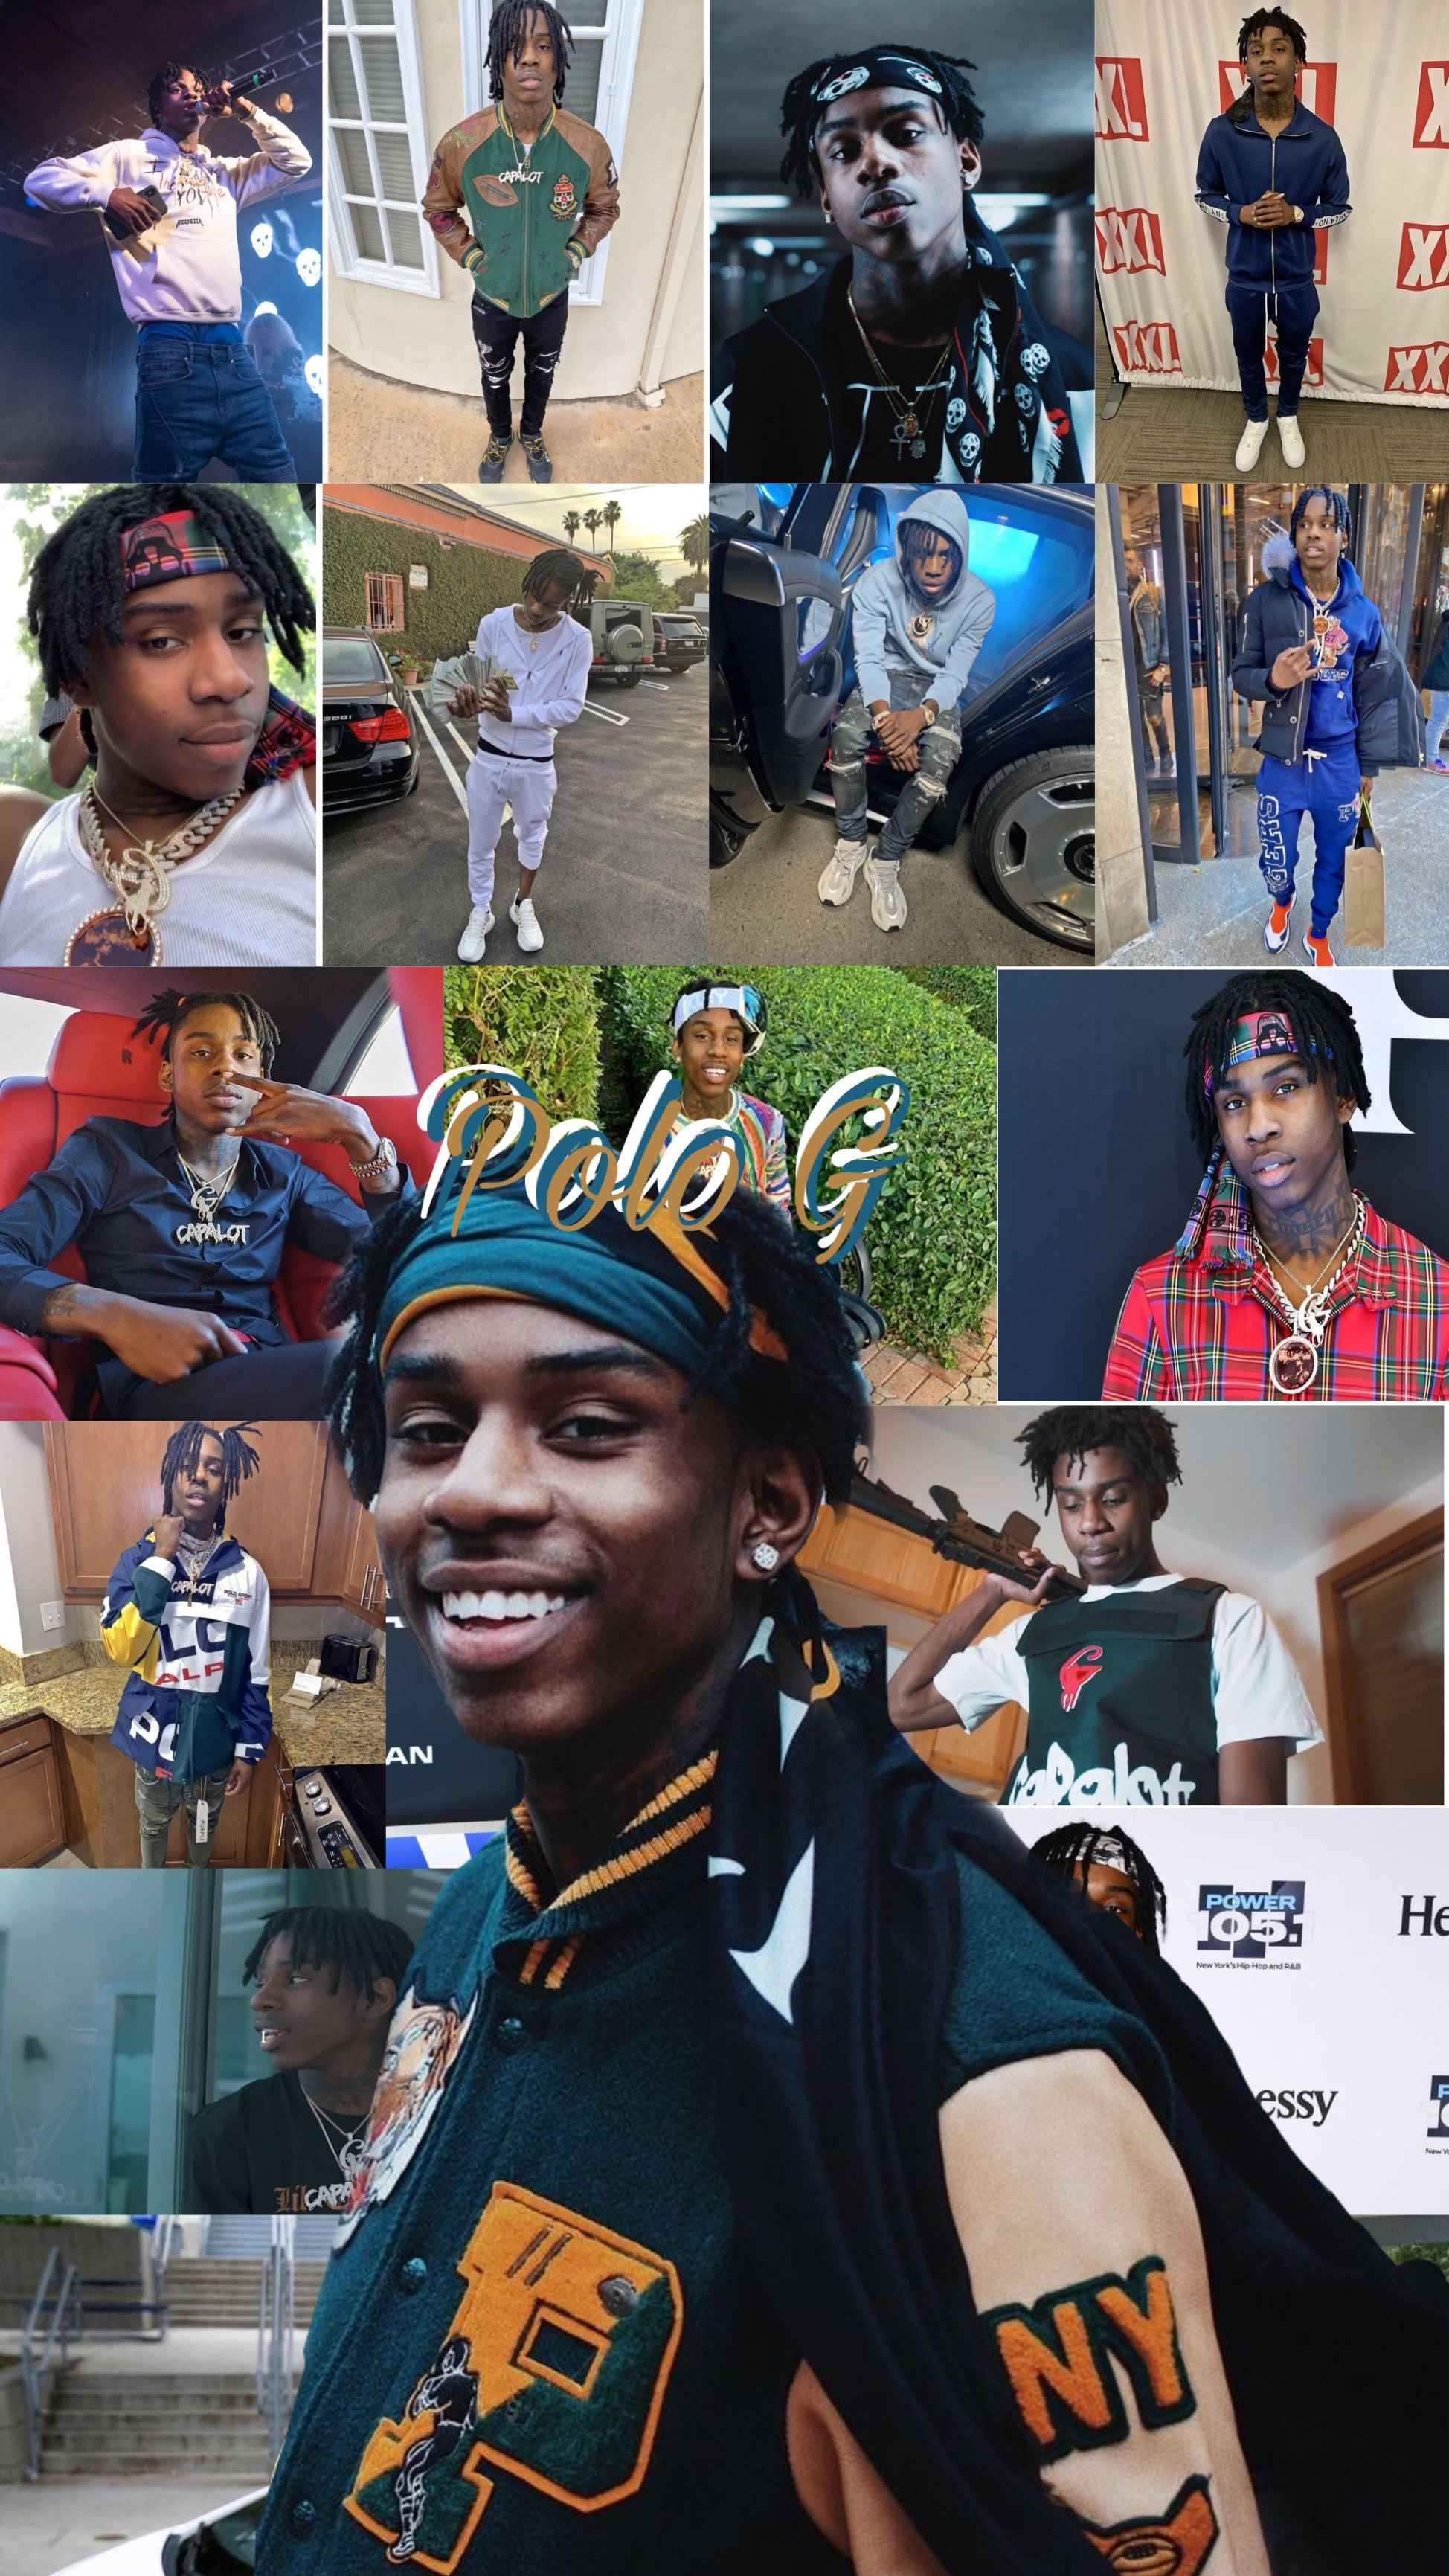 Pin. Polo G. Rapper wallpaper iphone, Cute rappers, Edgy wallpaper